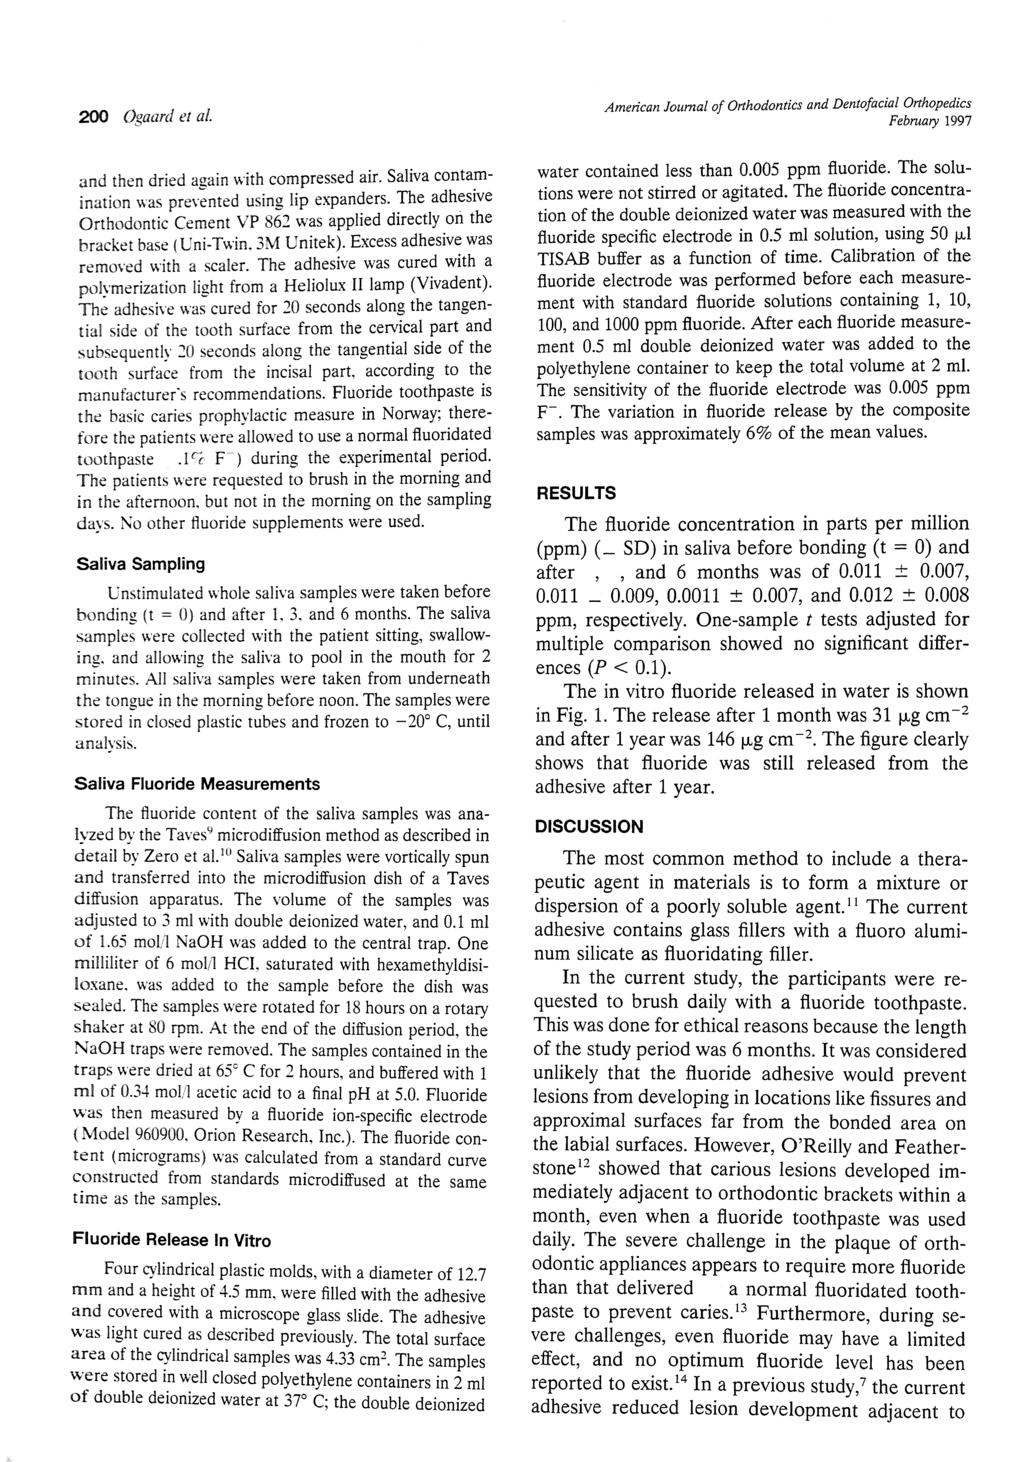 erican Journal of Orthodontics and Dentofacial Orthopedics 200 Ogaard e t ai. February 1997 and then dried again with compressed air. Saliva contamination was prevented using lip expanders.